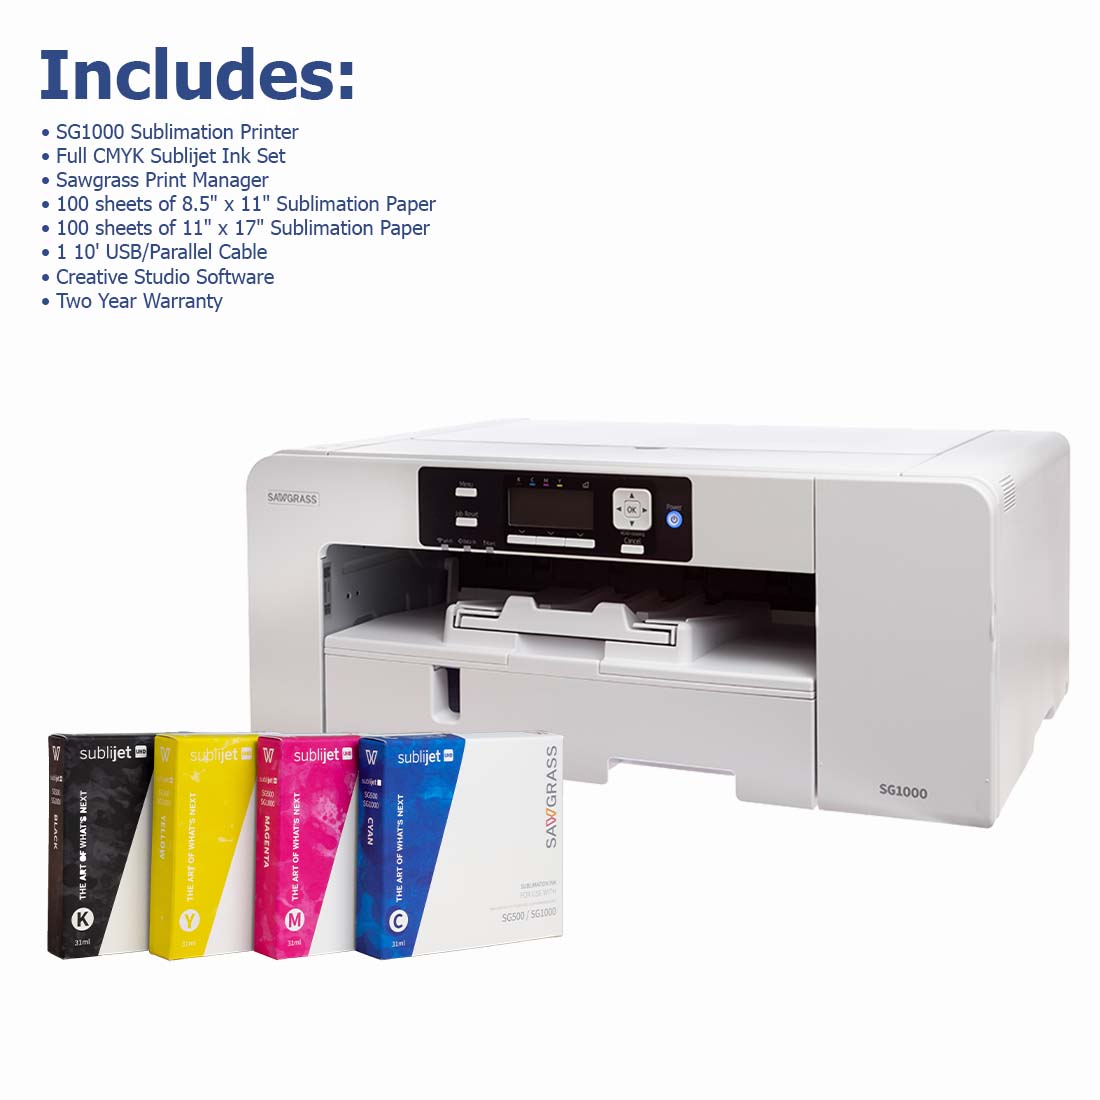 Sawgrass Virtuoso SG1000 Sublimation Printer Package - Joto Imaging Supplies Canada